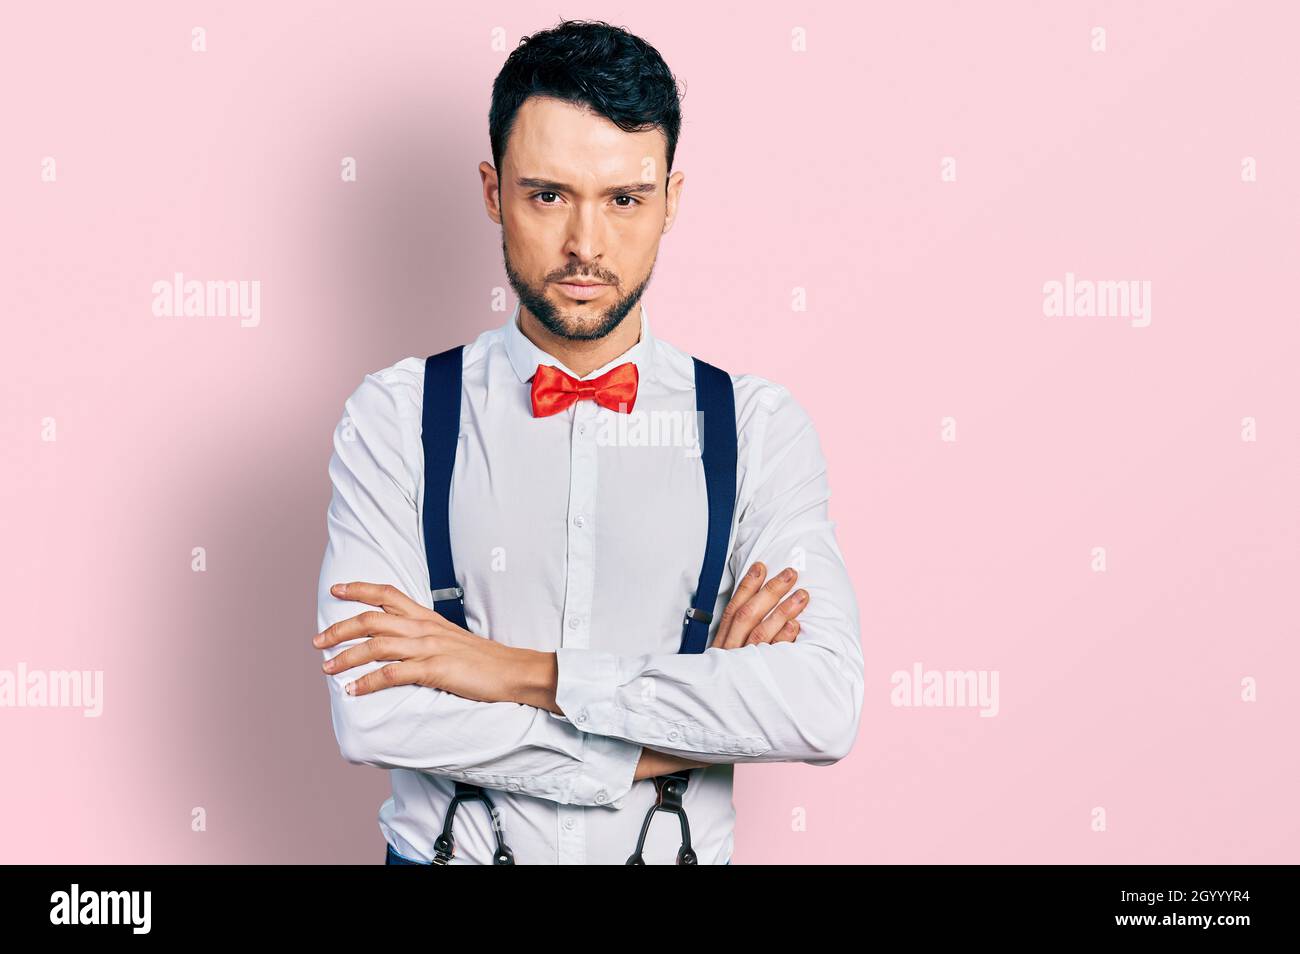 Hispanic man with beard wearing hipster look with bow tie and suspenders skeptic and nervous, disapproving expression on face with crossed arms. negat Stock Photo